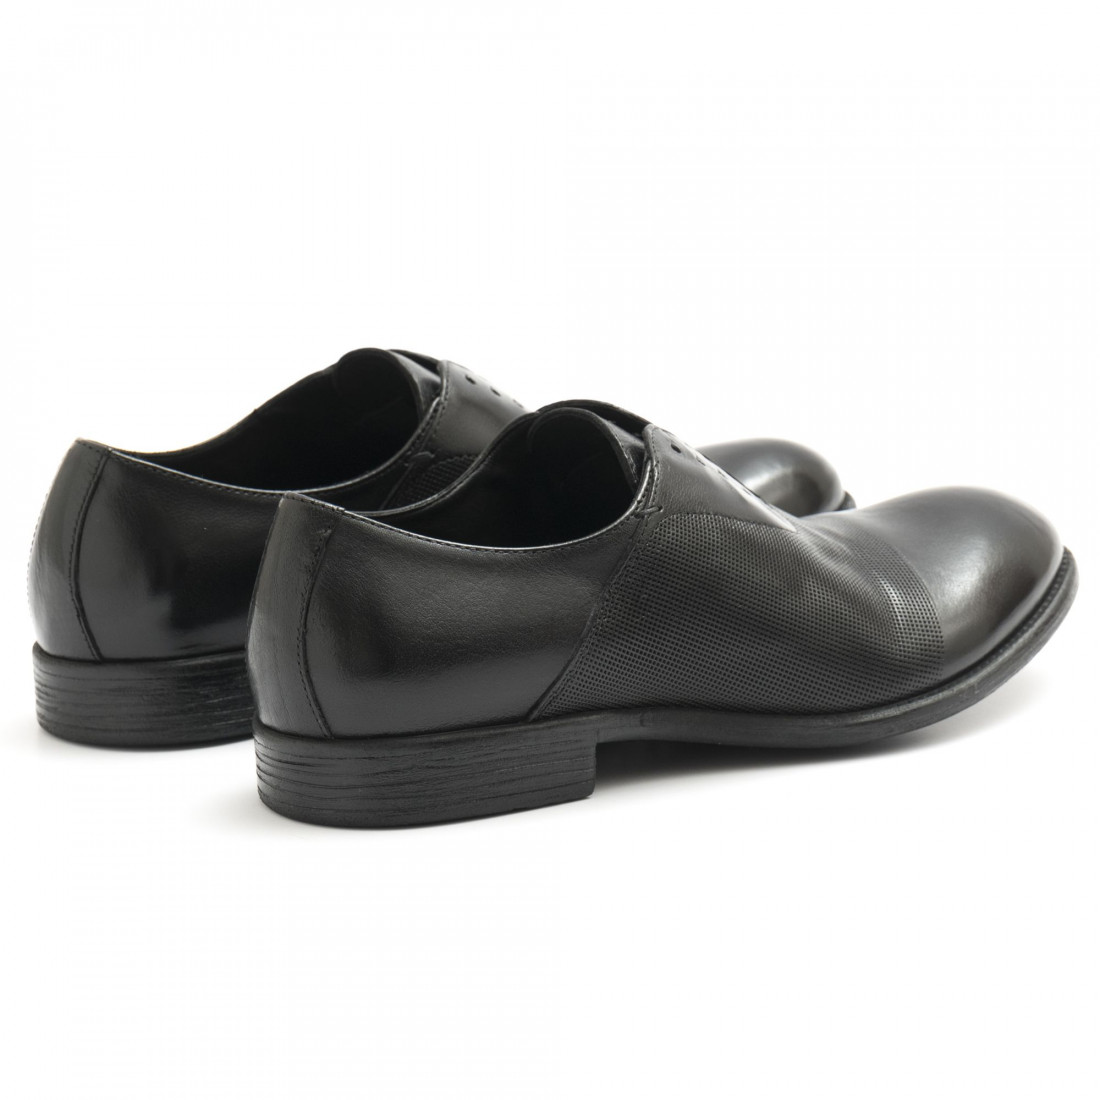 Black perforated leather Hundred 100 oxford shoes